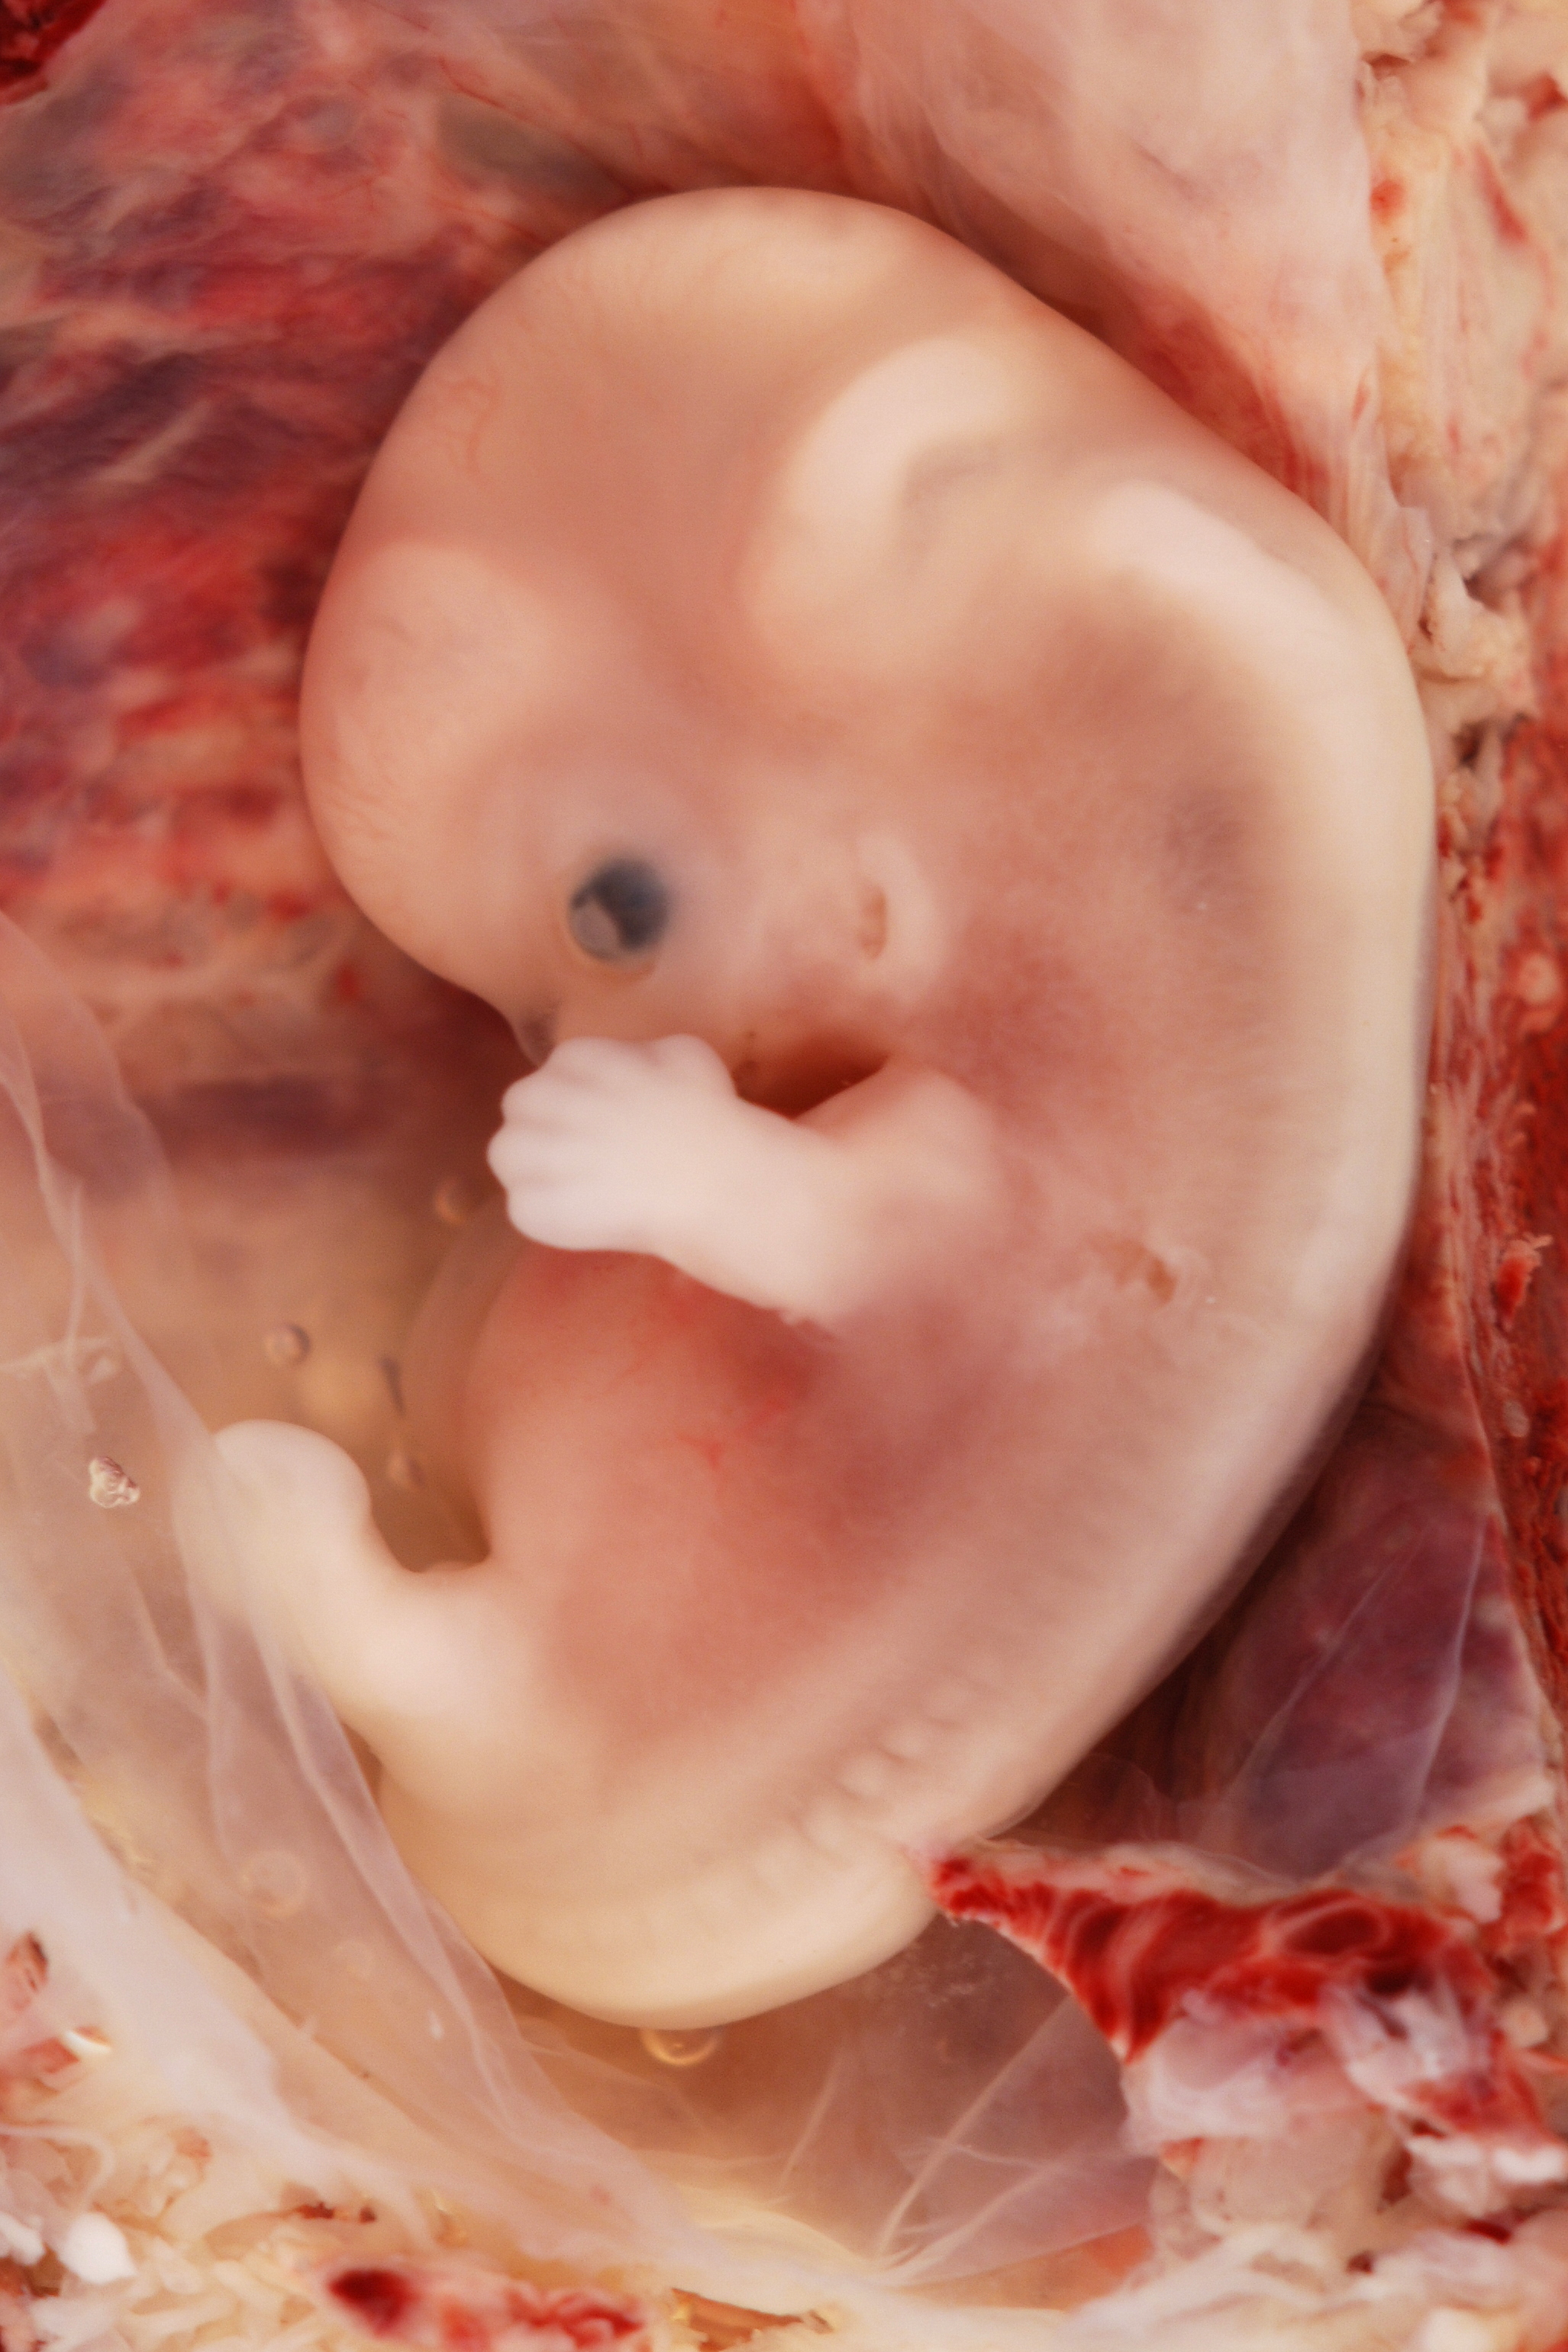 9 week old baby in womb